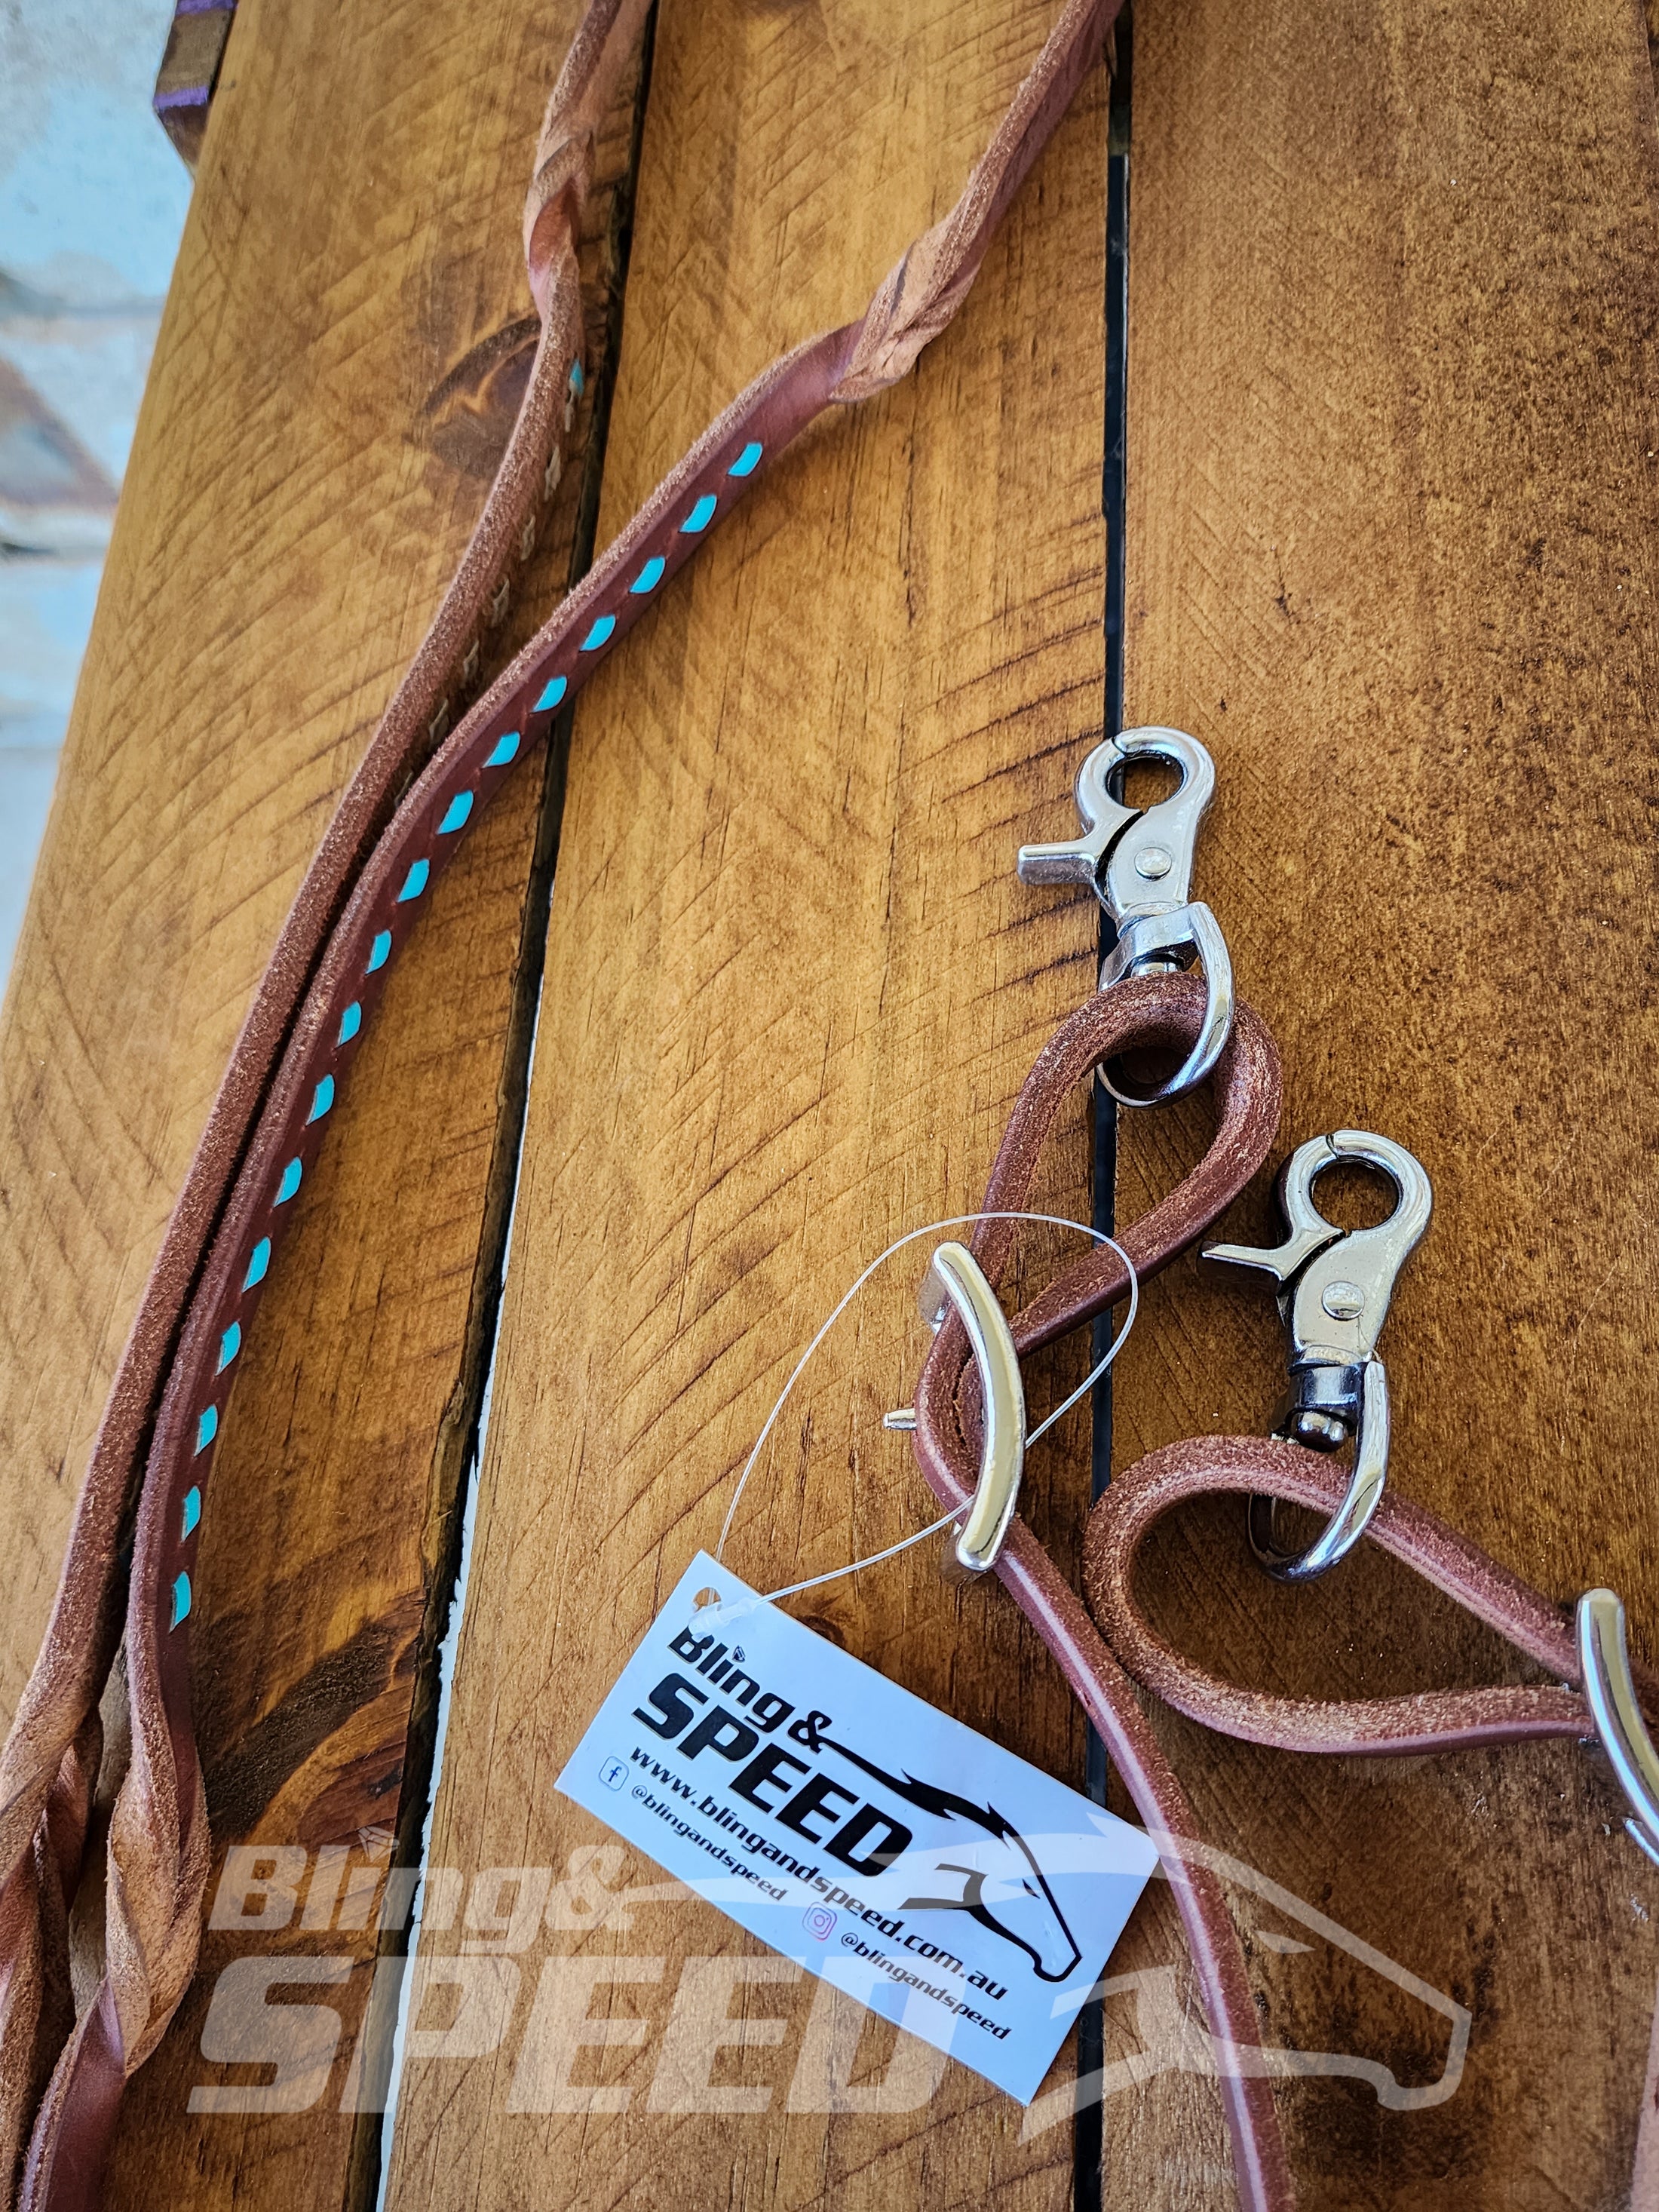 Bling & Speed Twisted Bloodknot Buckstitched Barrel Reins - Turquoise (7977754722542)